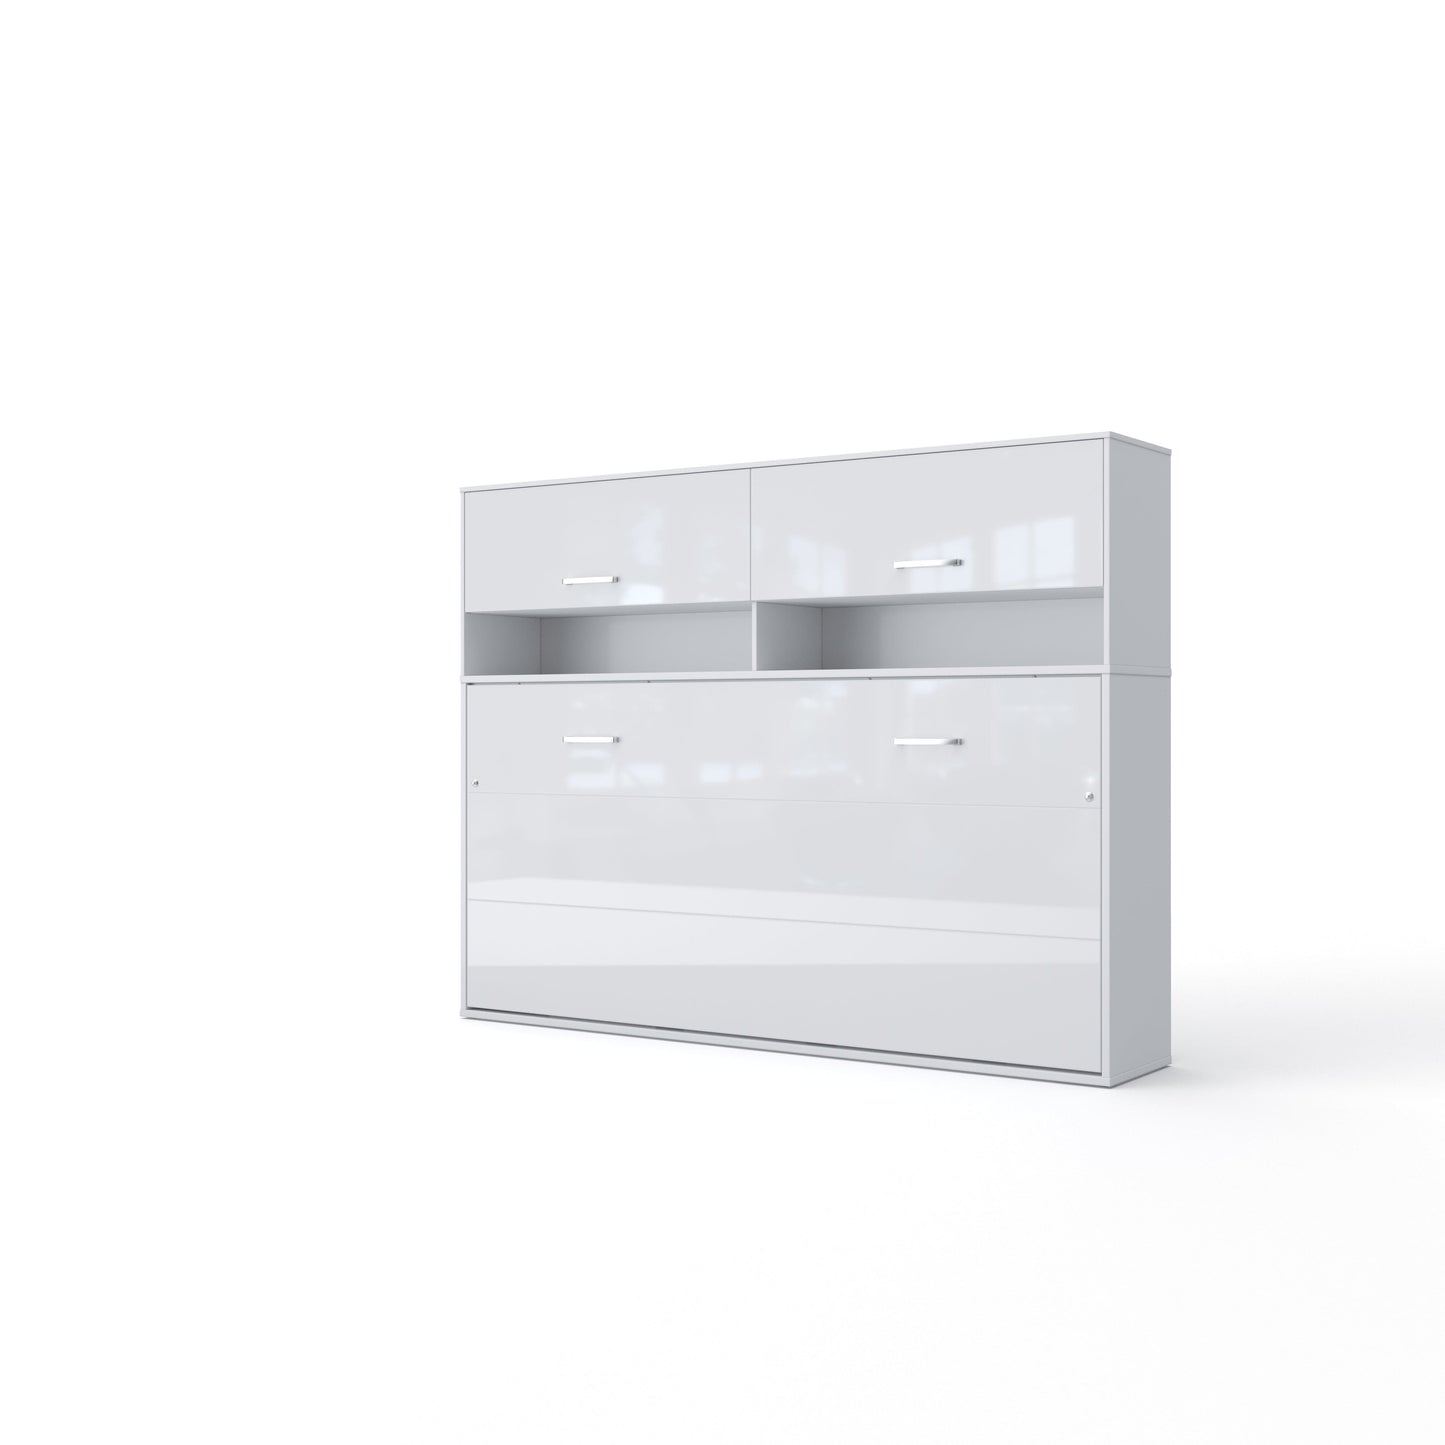 Maxima House Maxima House Invento Horizontal Wall Bed, European Twin Size with a cabinet on top White/White IN90H-11W